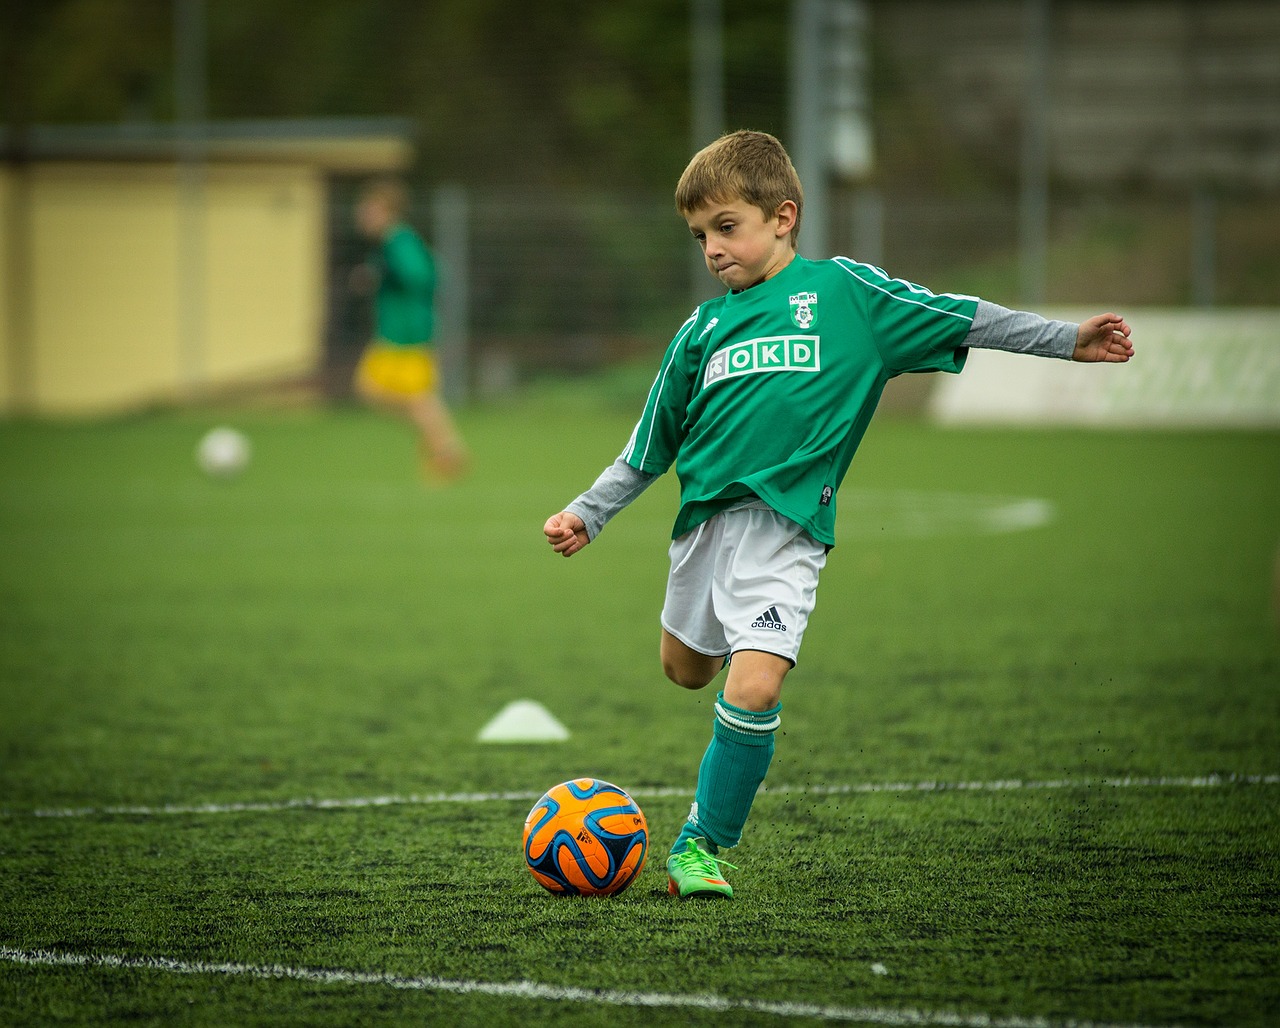 Tips and Ideas to Become A Professional Soccer Player